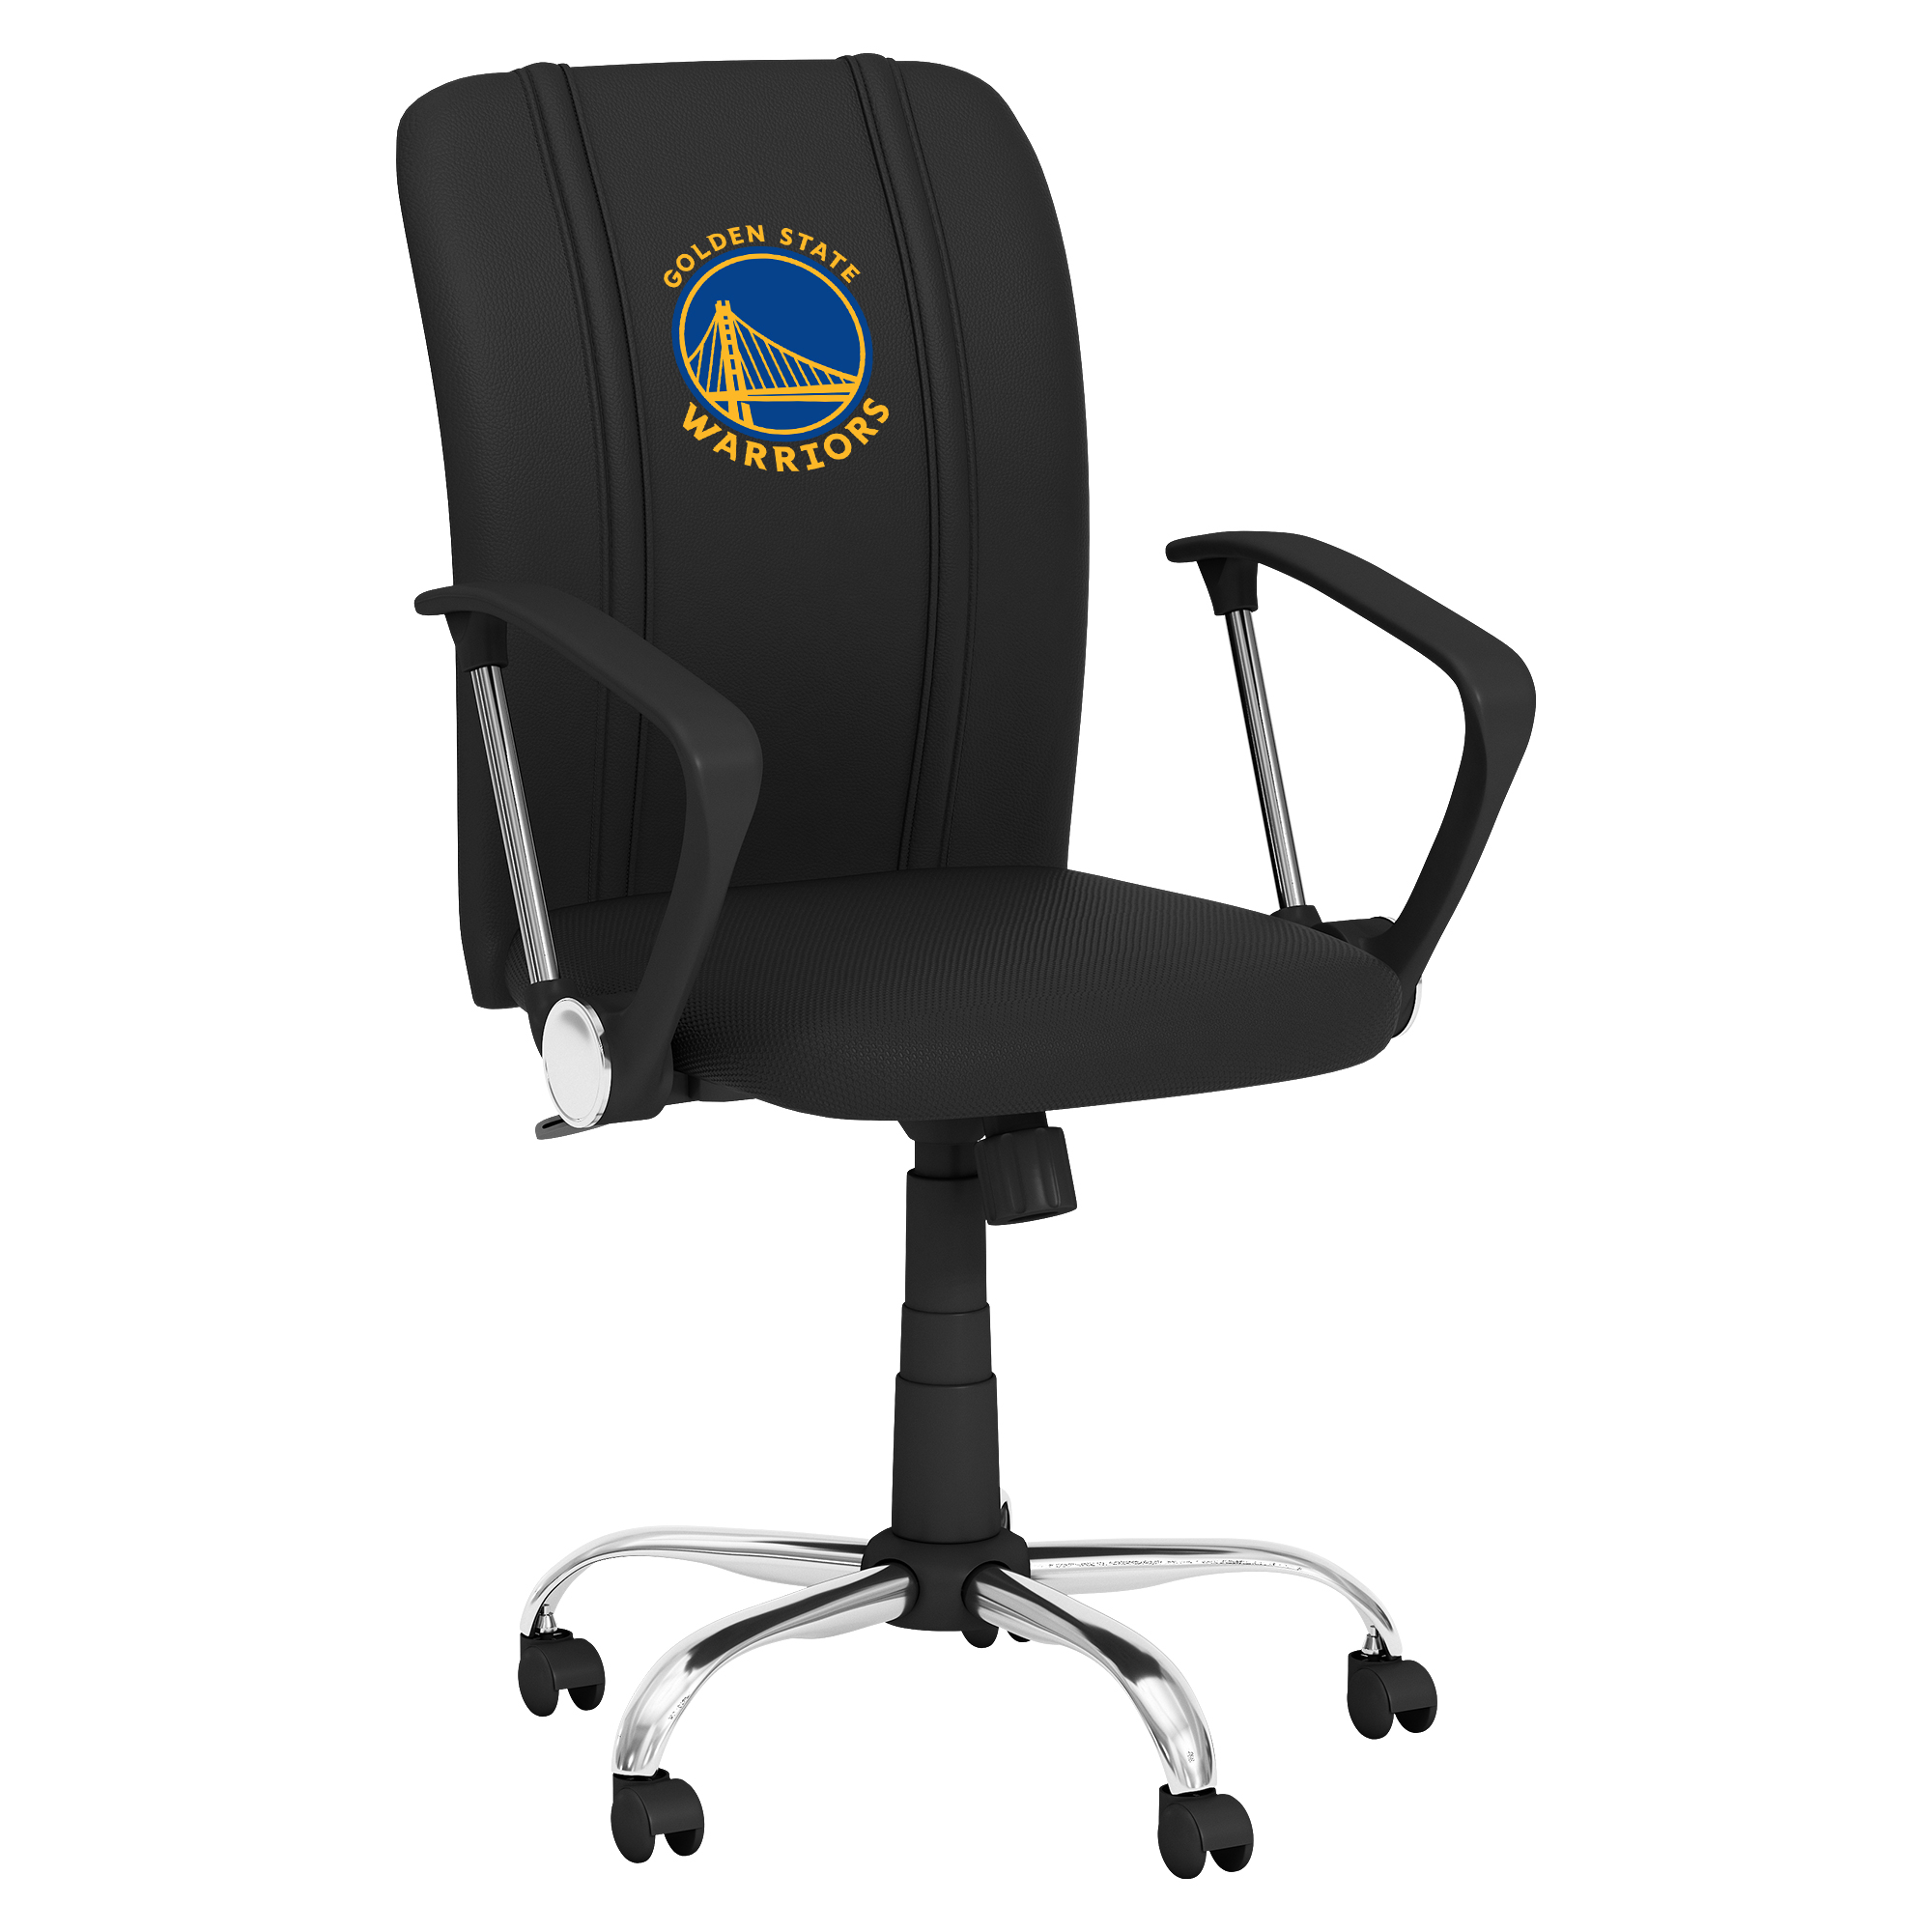 Golden State Warriors Curve Task Chair with Golden State Warriors Global Logo